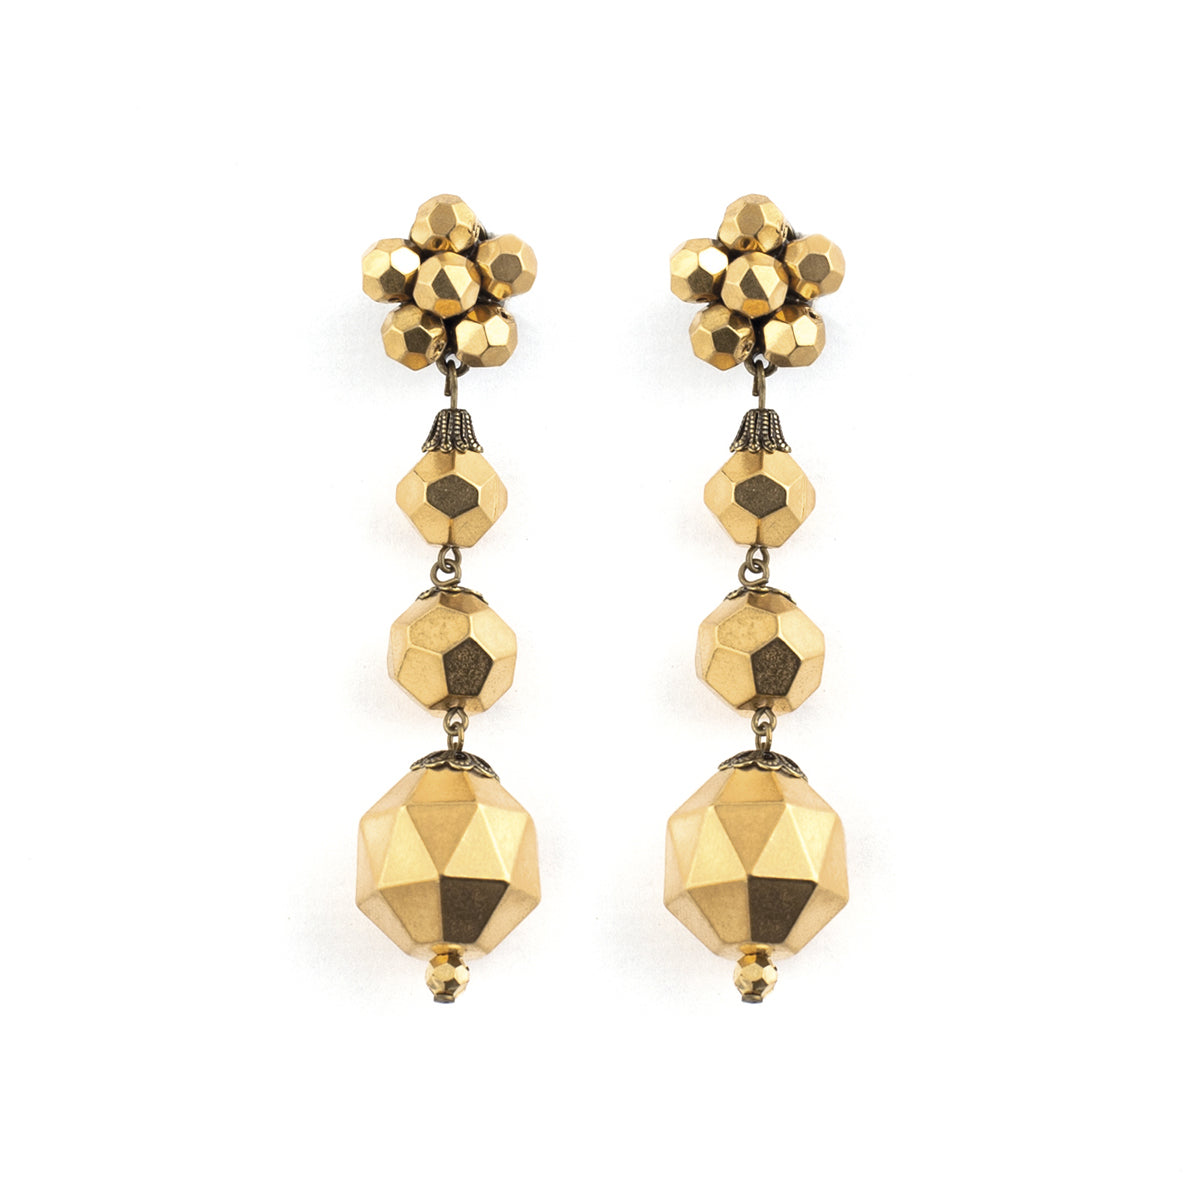 Donna Earrings - Limited Edition